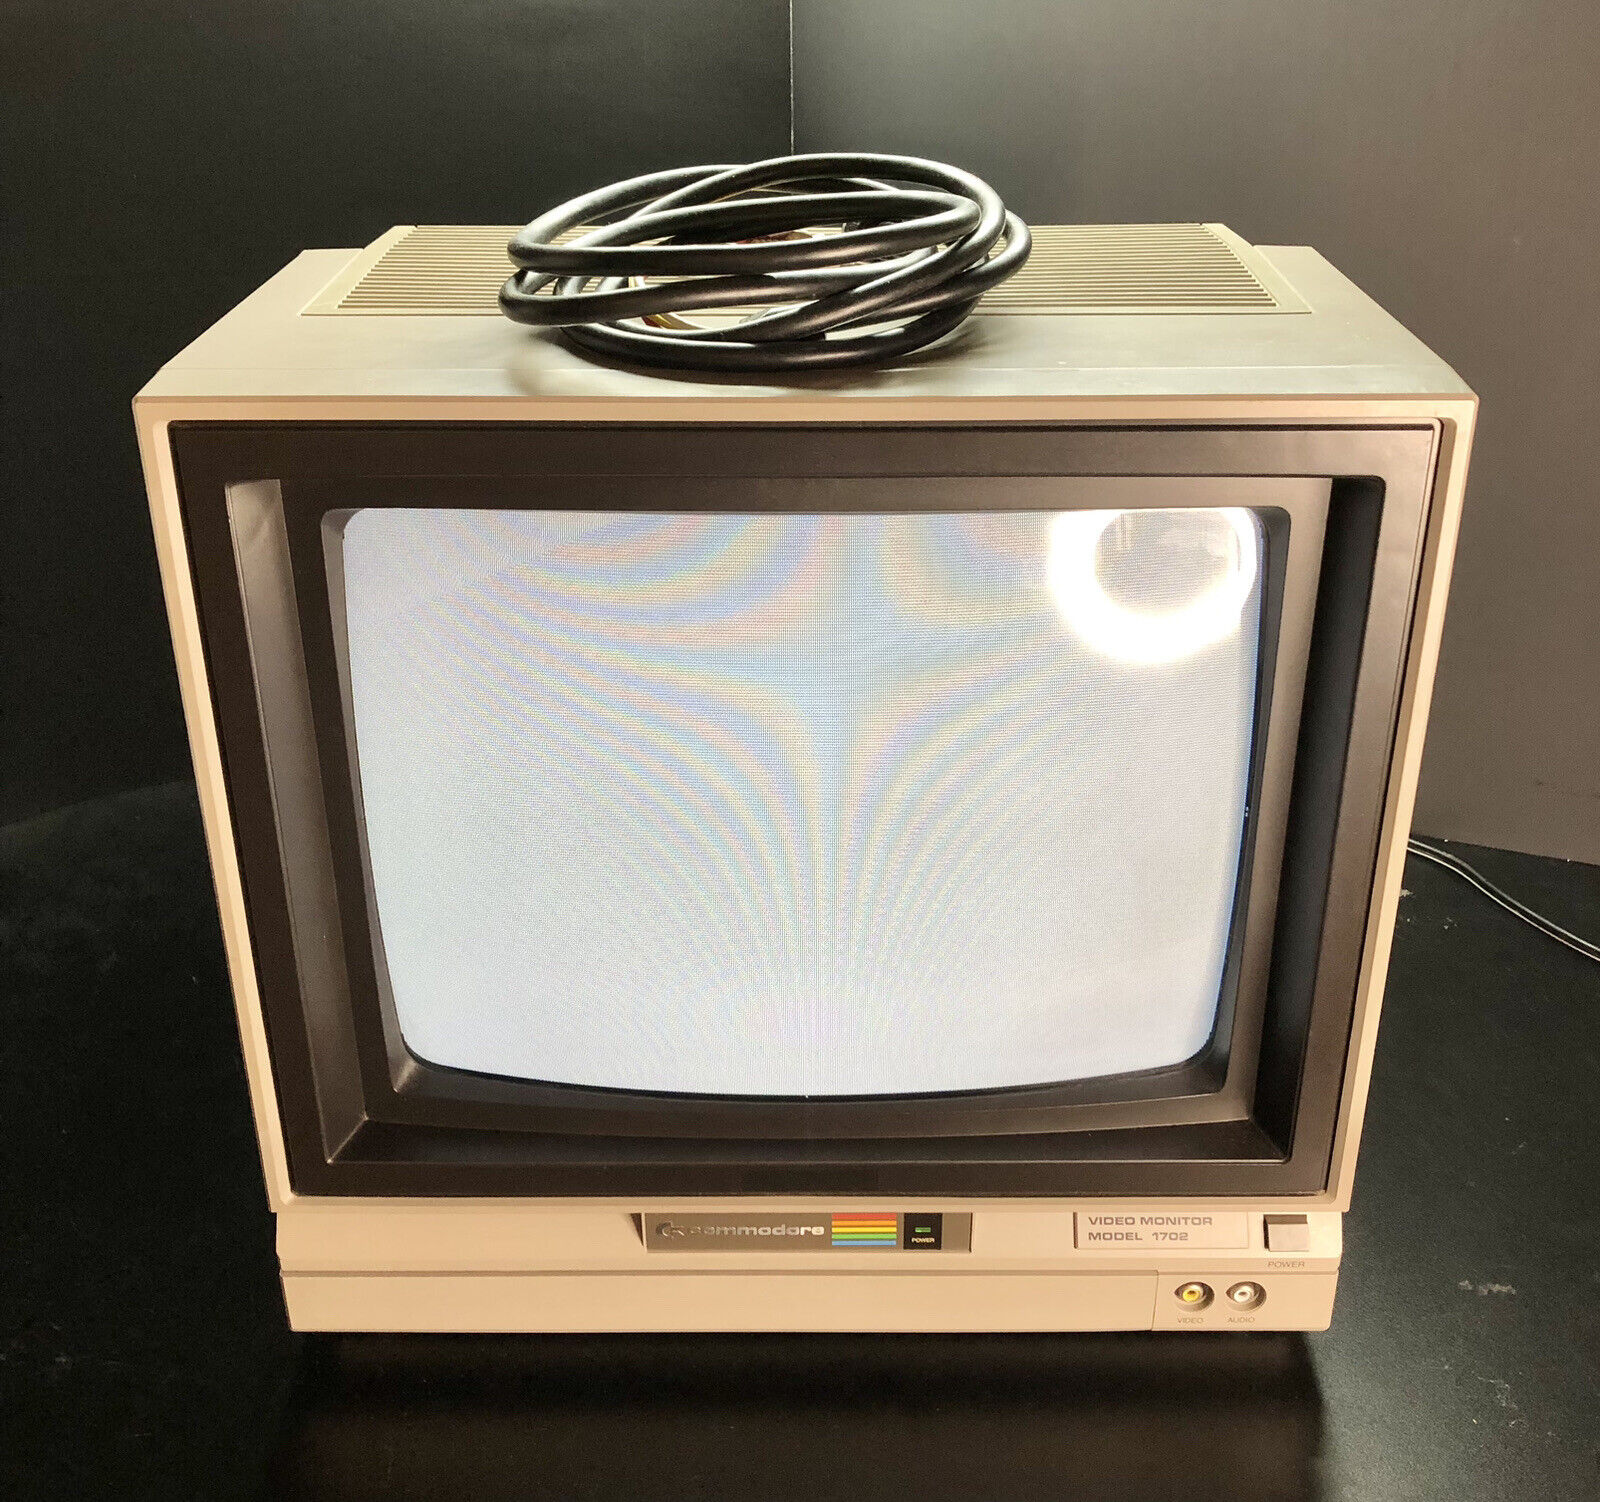 VTG Commodore 1702 Monitor 1985 Gaming TV Tested Working Picture/Sound Nice-READ